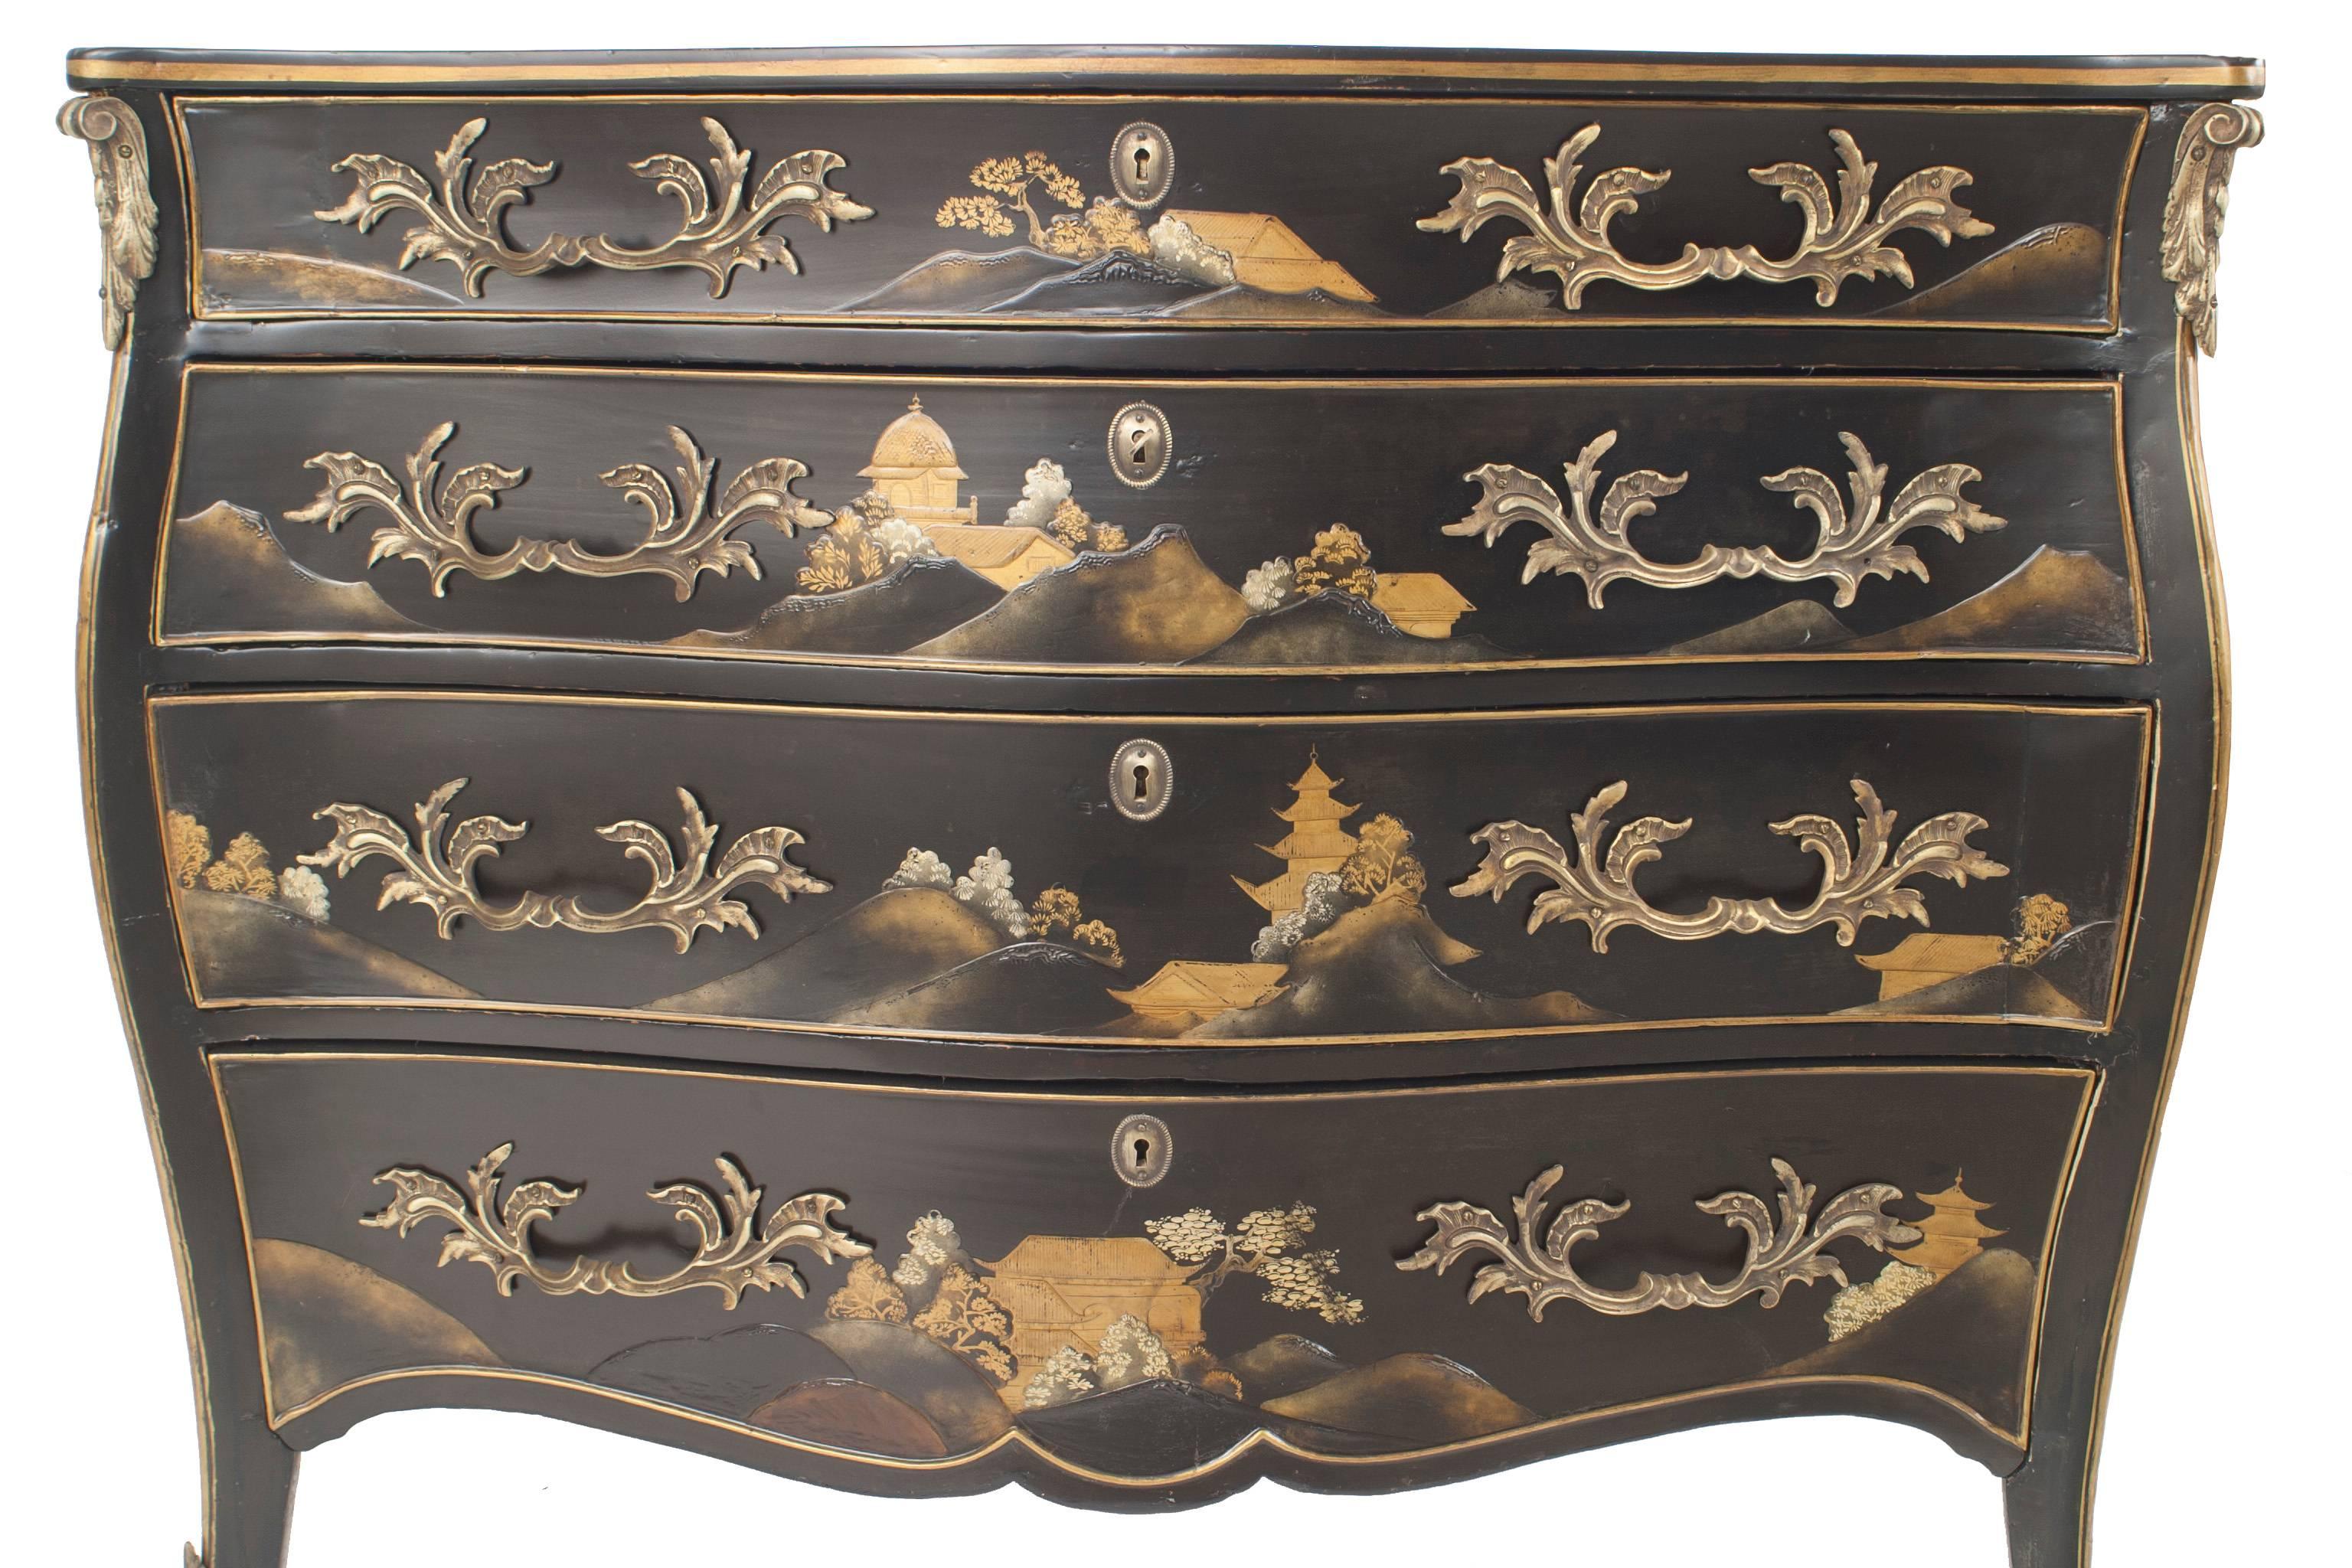 French Louis XV style (20th Century) black lacquered Chinoiserie decorated commode with a bombe shape and 4 drawers with bronze trim.
